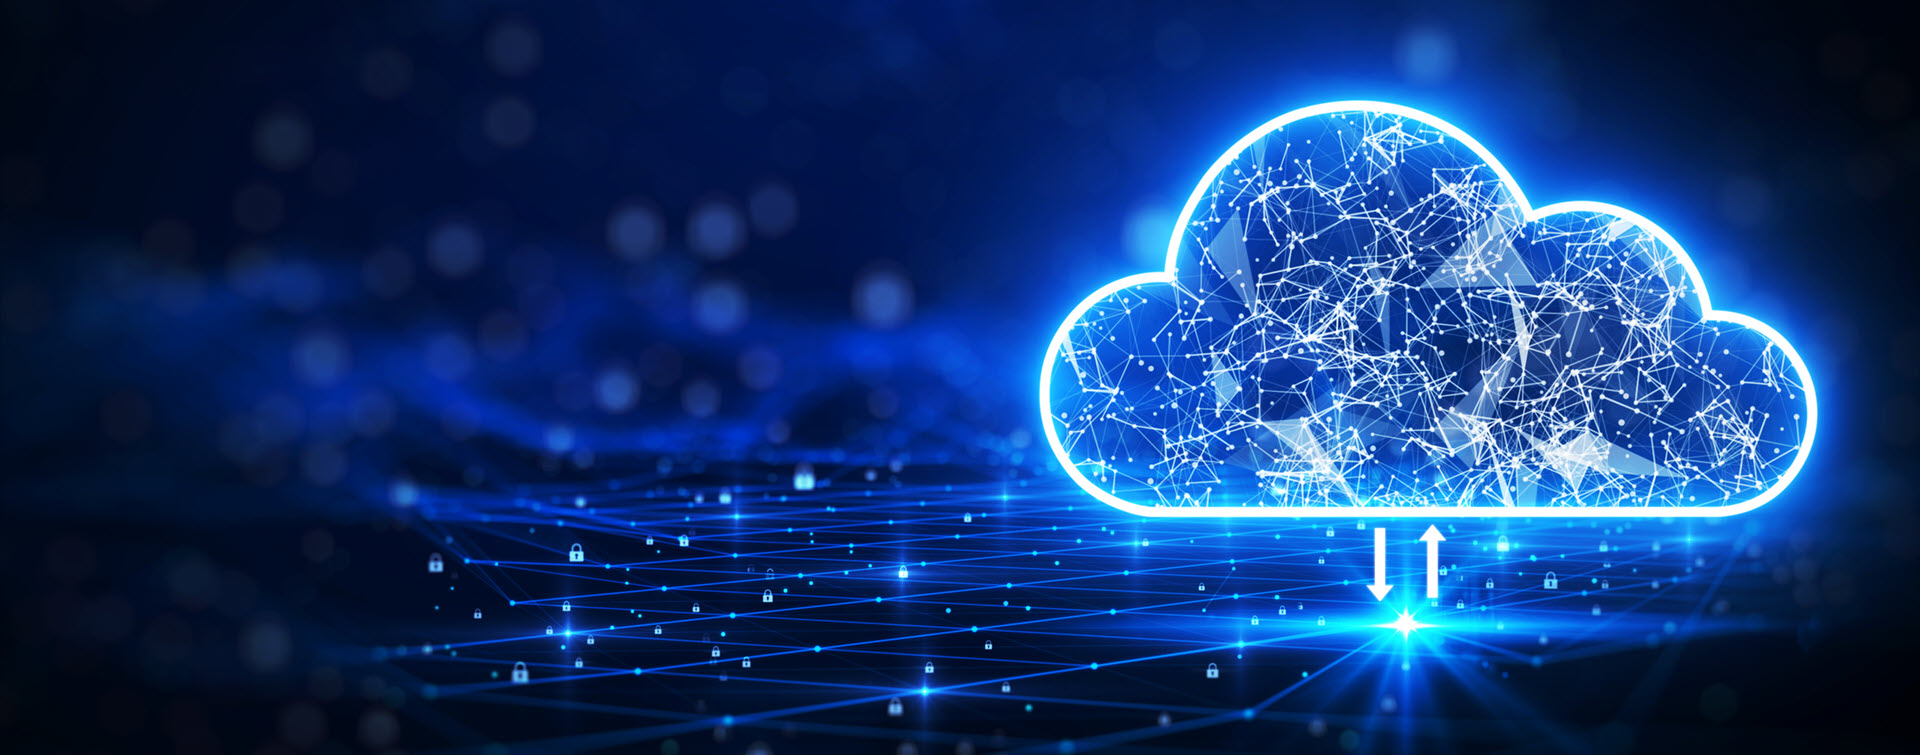 5 keys to readiness for cloud migration and secure network operations with NetSecOps